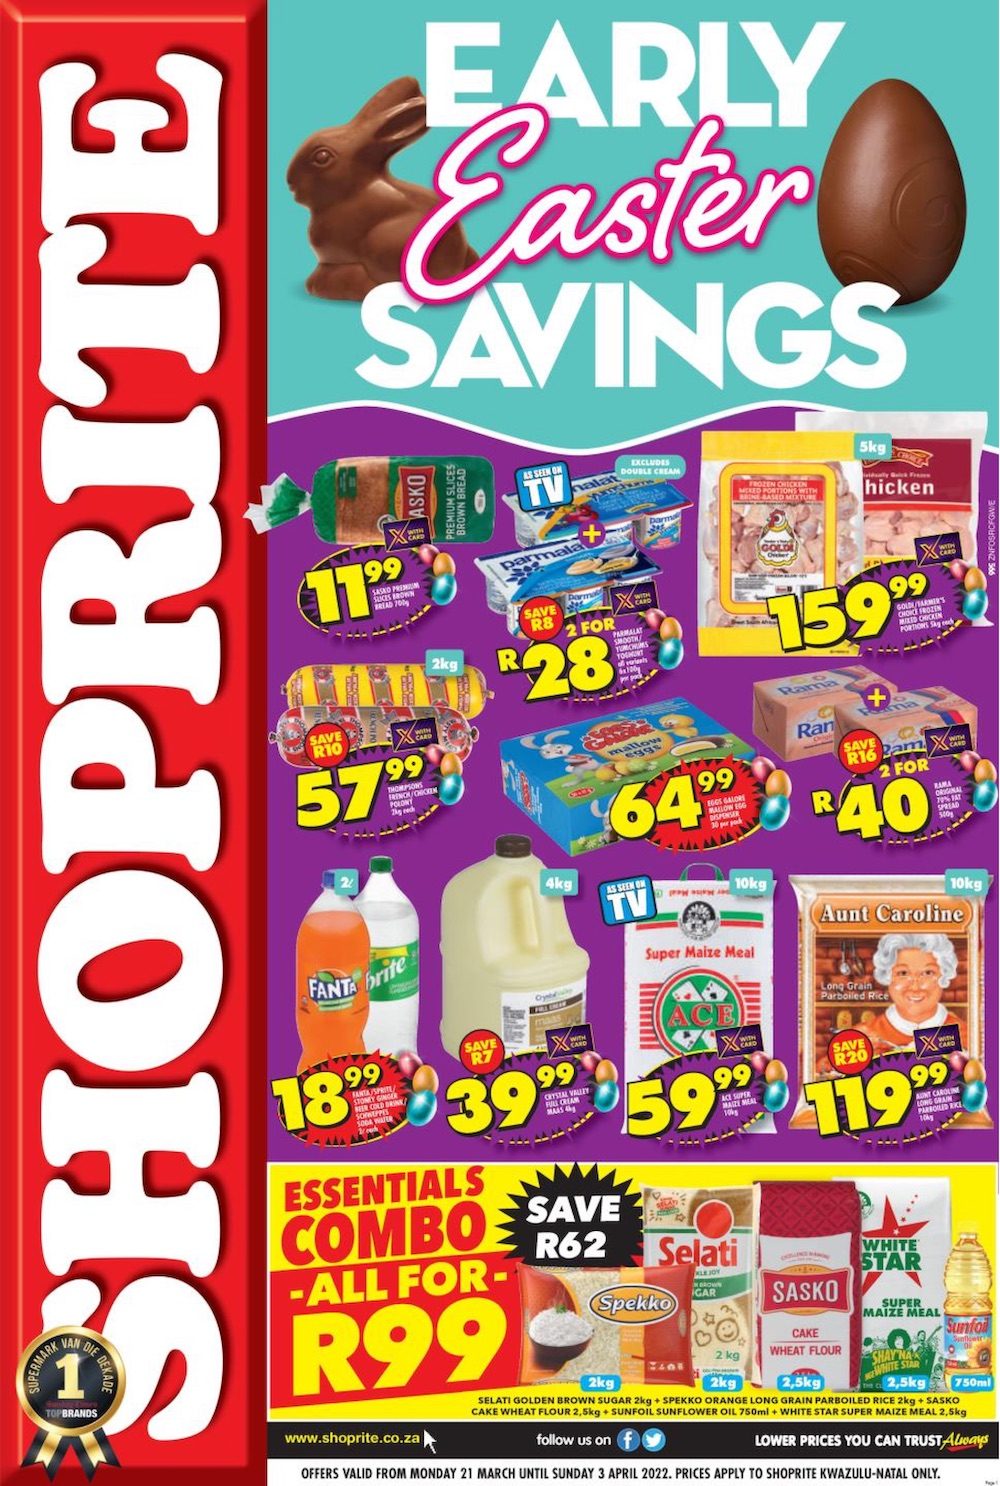 Shoprite Specials Early Easter Savings 2022 | Shoprite Catalogue | Easter